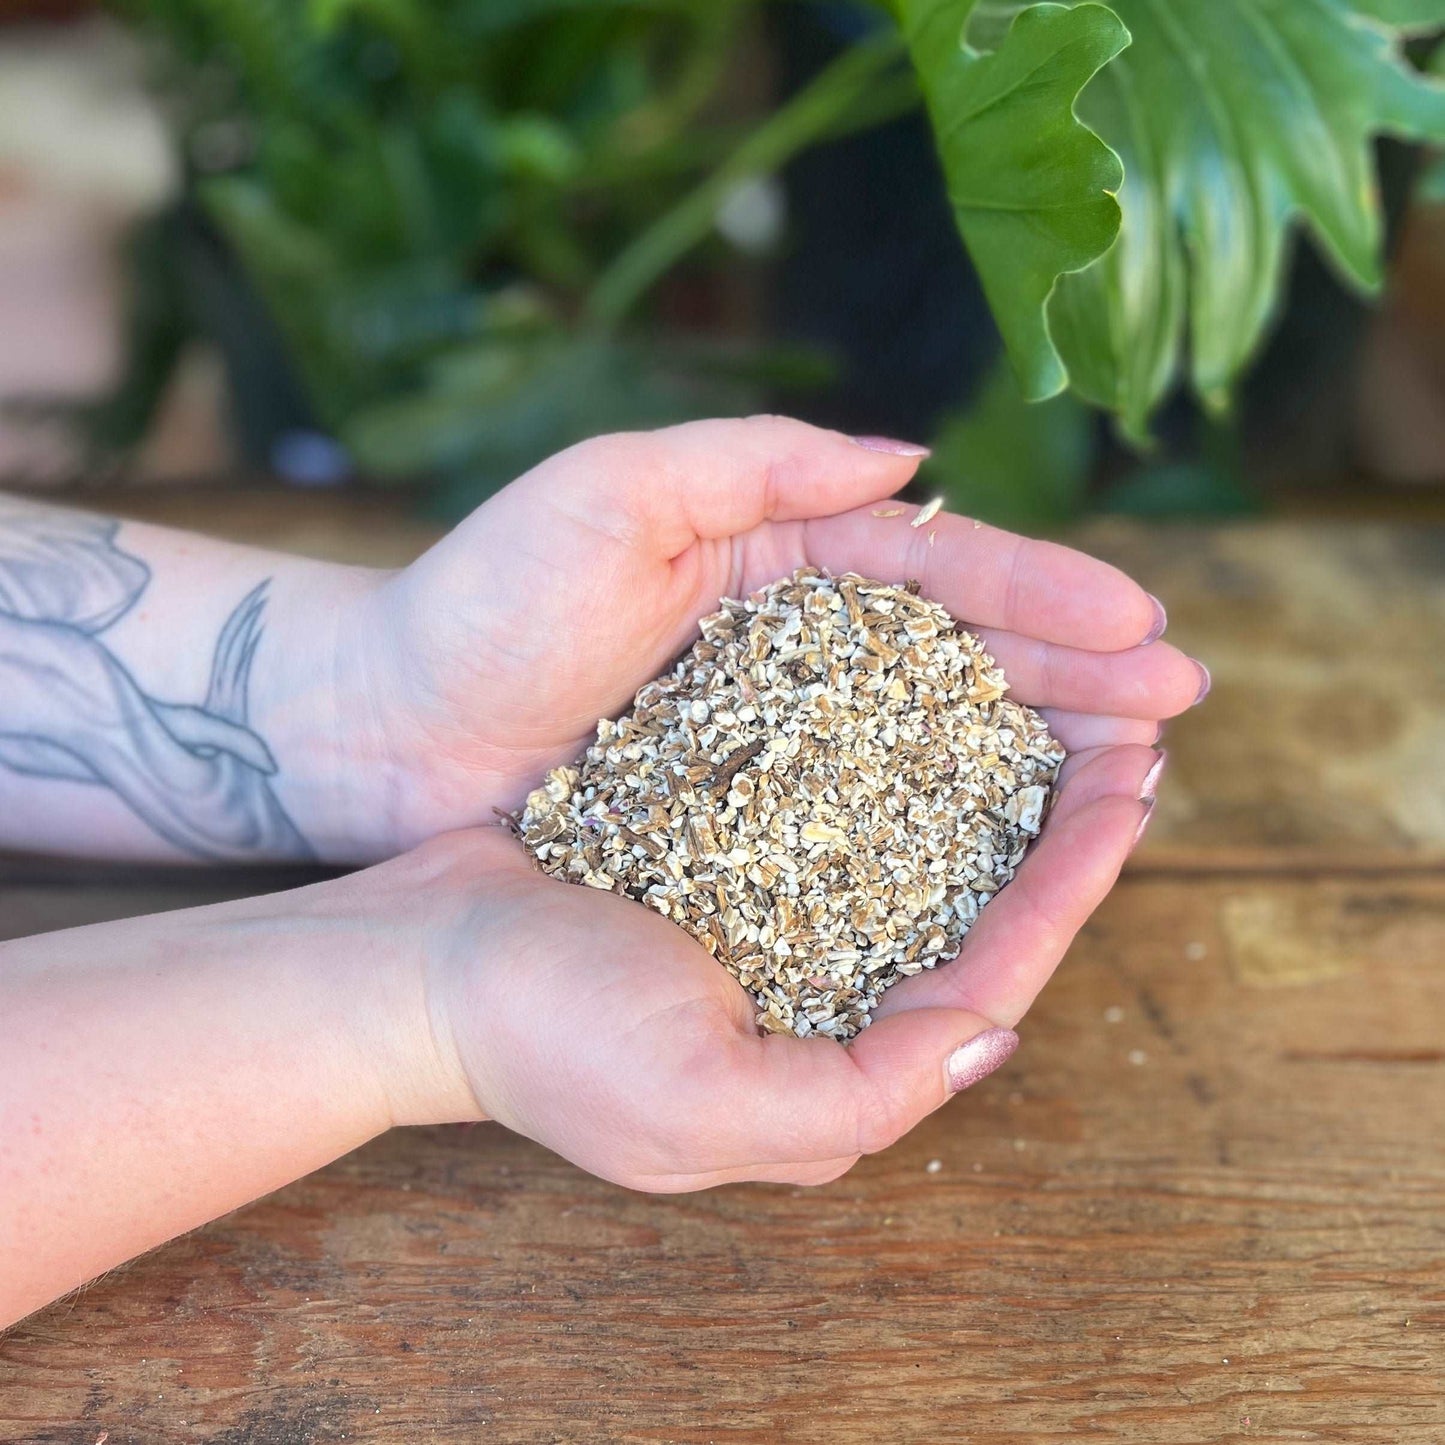 1 ounce Organic Dandelion Root - Elevate your herbal collection with organic Dandelion Root. Beyond its earthy flavor, Dandelion Root is believed to bring luck, enhance divination, and promote overall well-being. Immerse yourself in the organic richness of Dandelion Root.